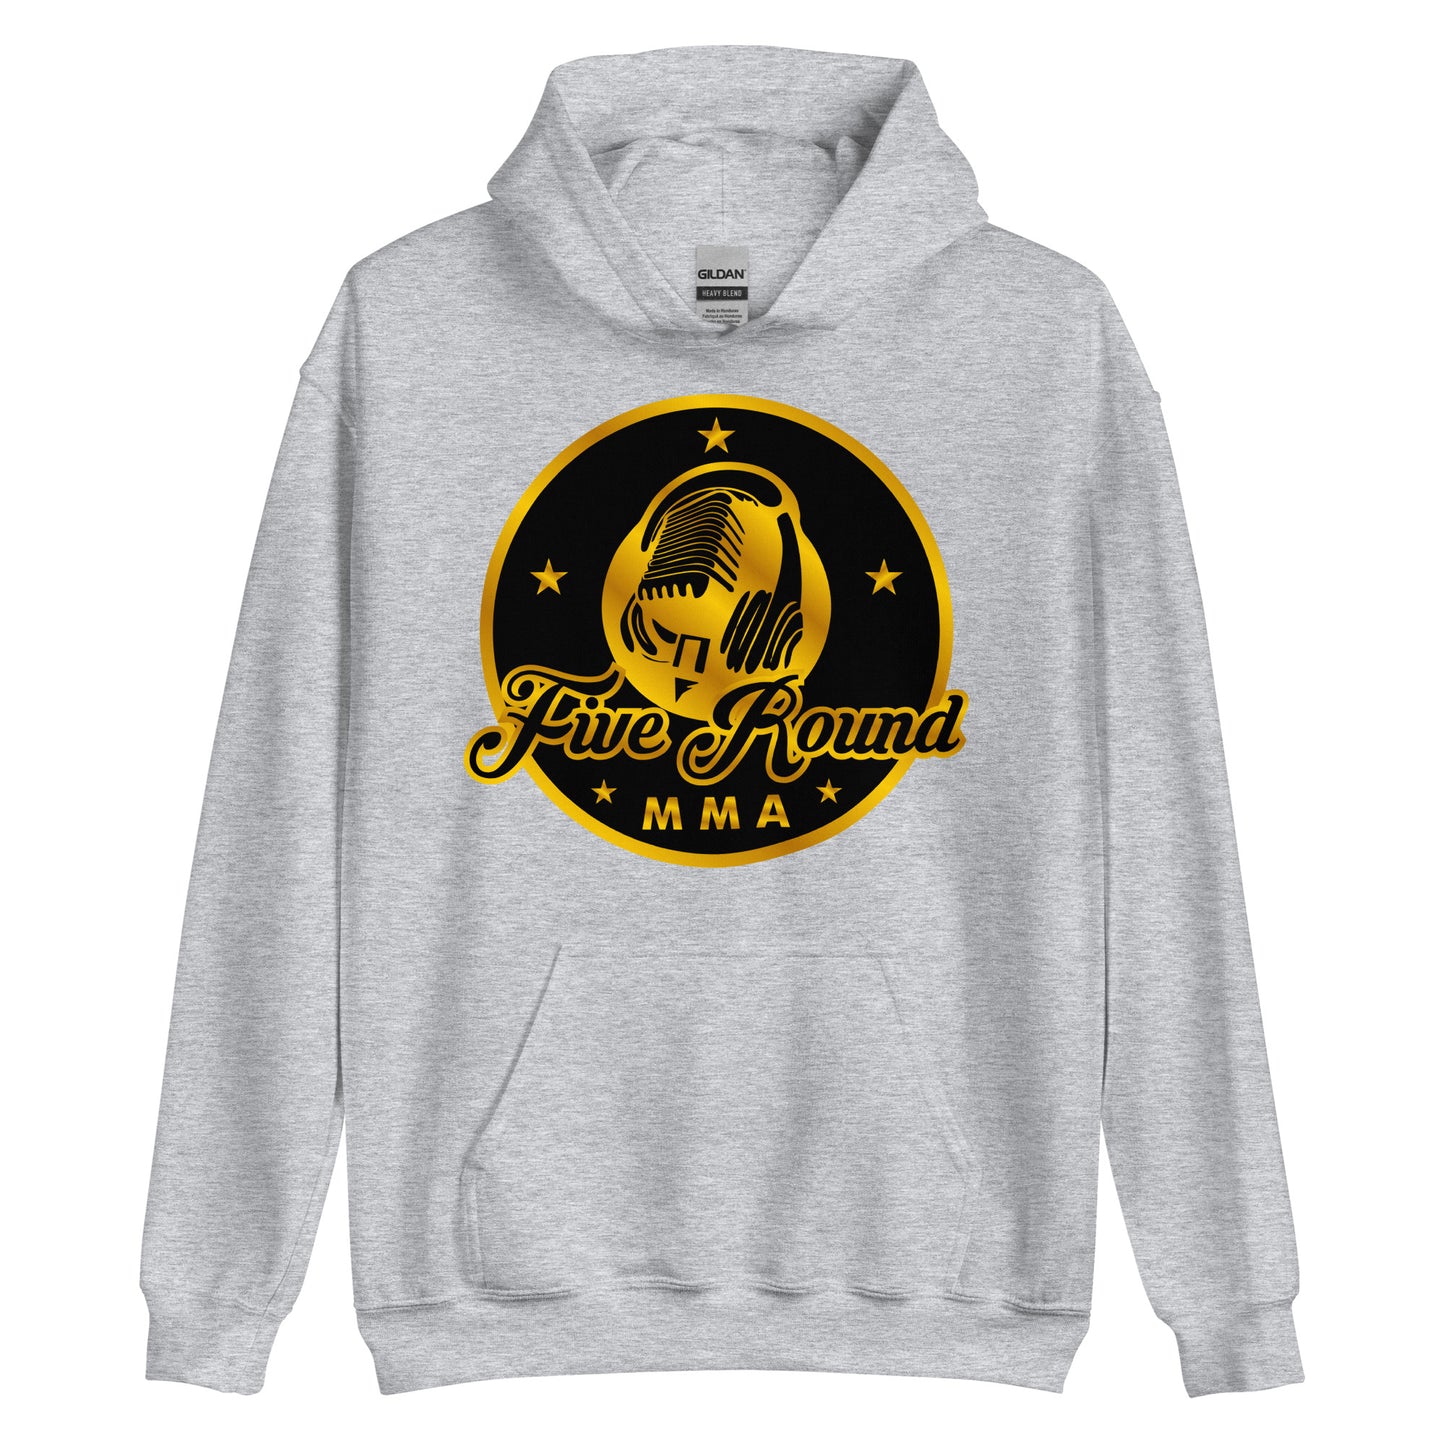 FIVE ROUND MMA HOODIE - Presented by Dos Leprechauns Media